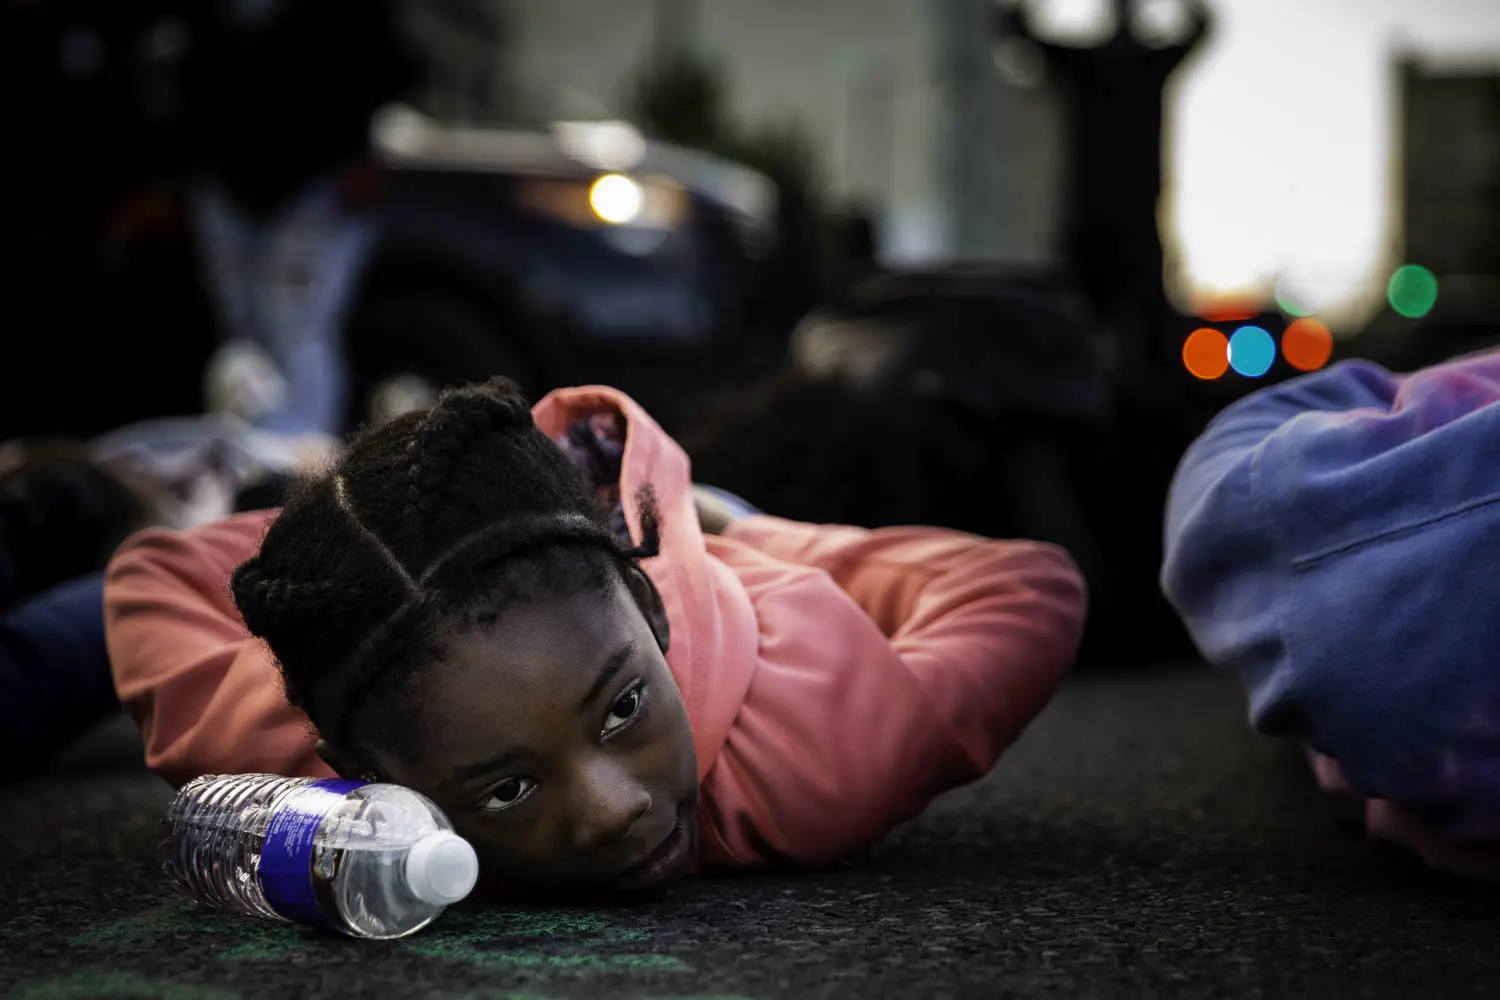 A young girl lies on the ground with her hands behind her back during a protest. A plastic water bottle lies by her head.